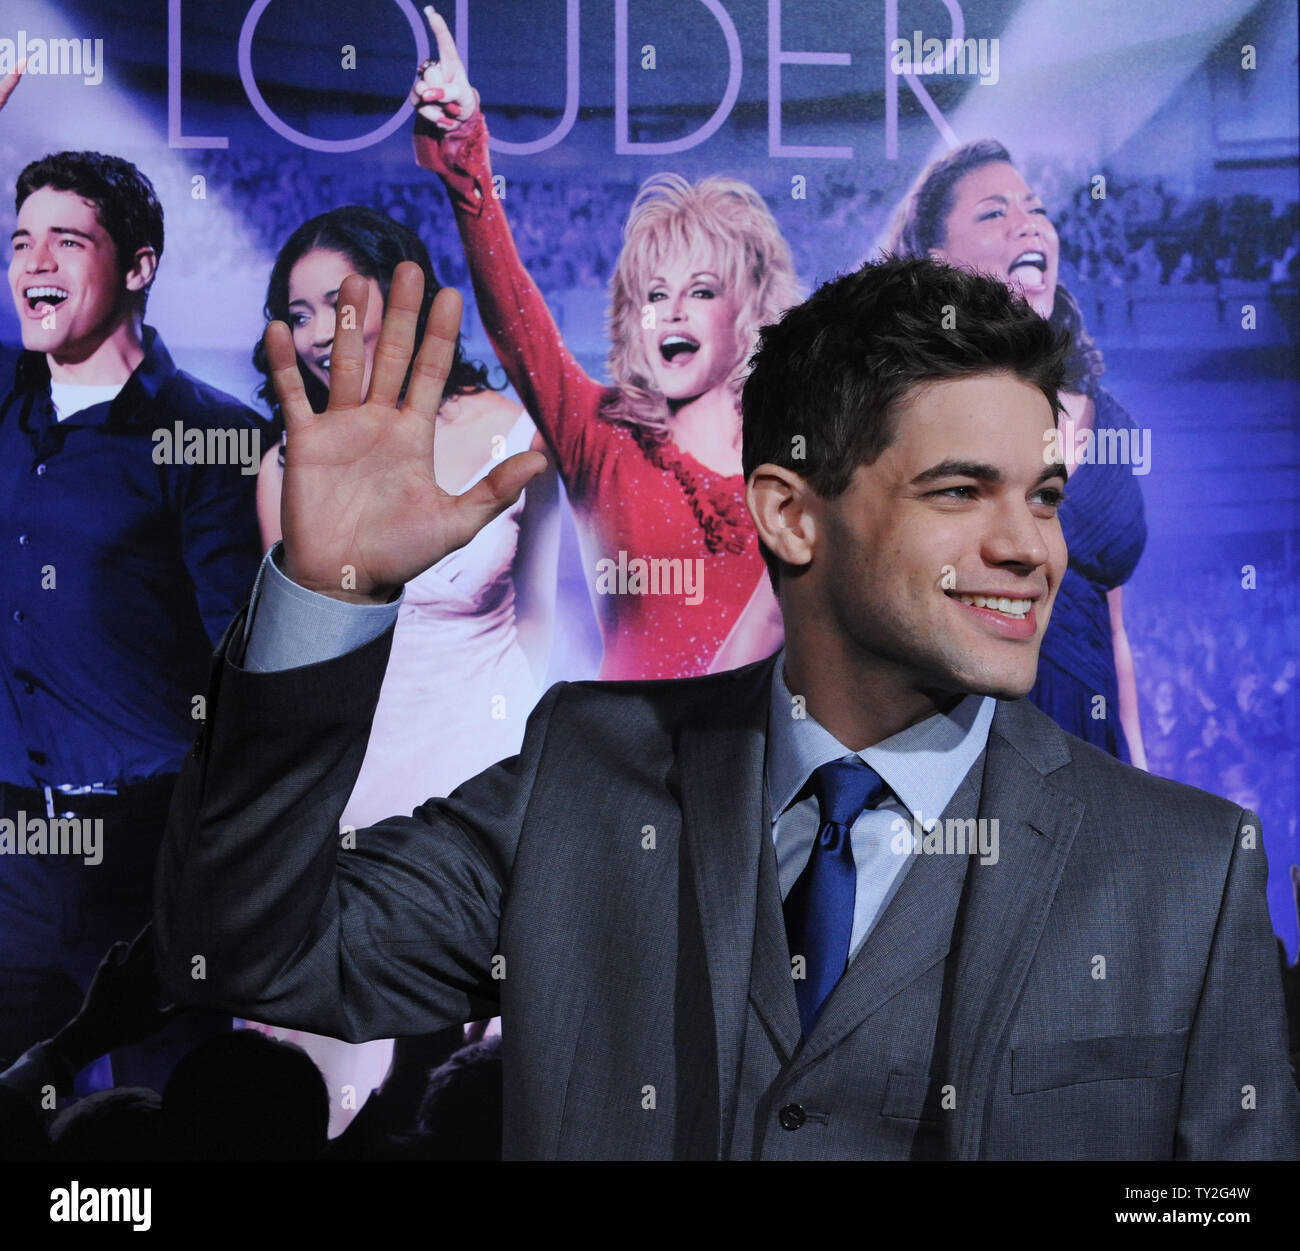 Jeremy Jordan, a cast member in the motion picture musical comedy 